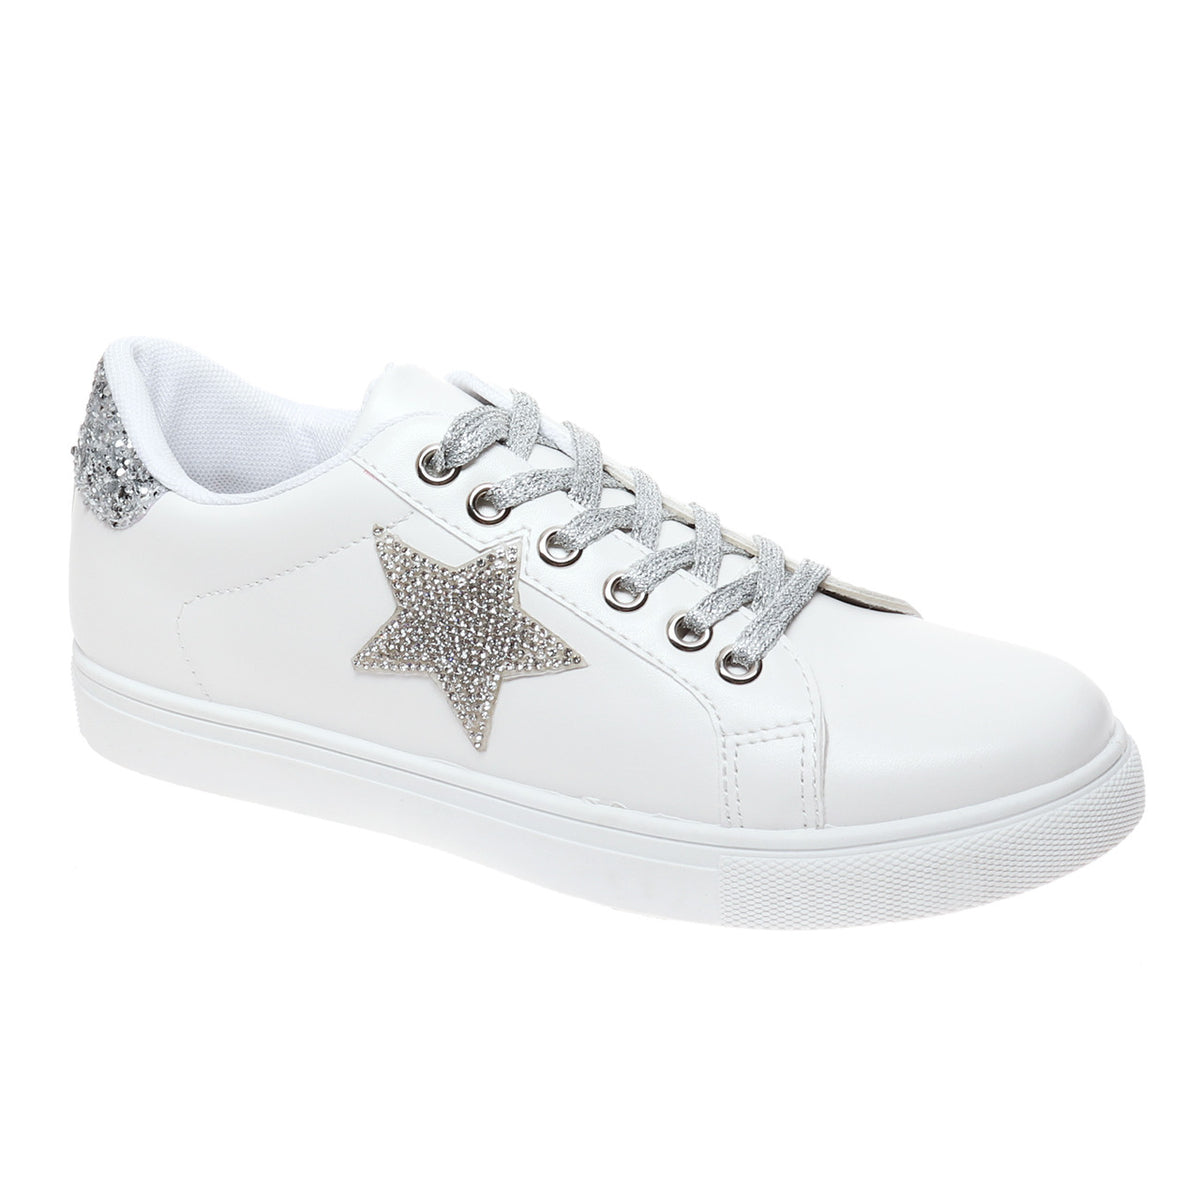 Twinkle of Stars Lace Up Shoe